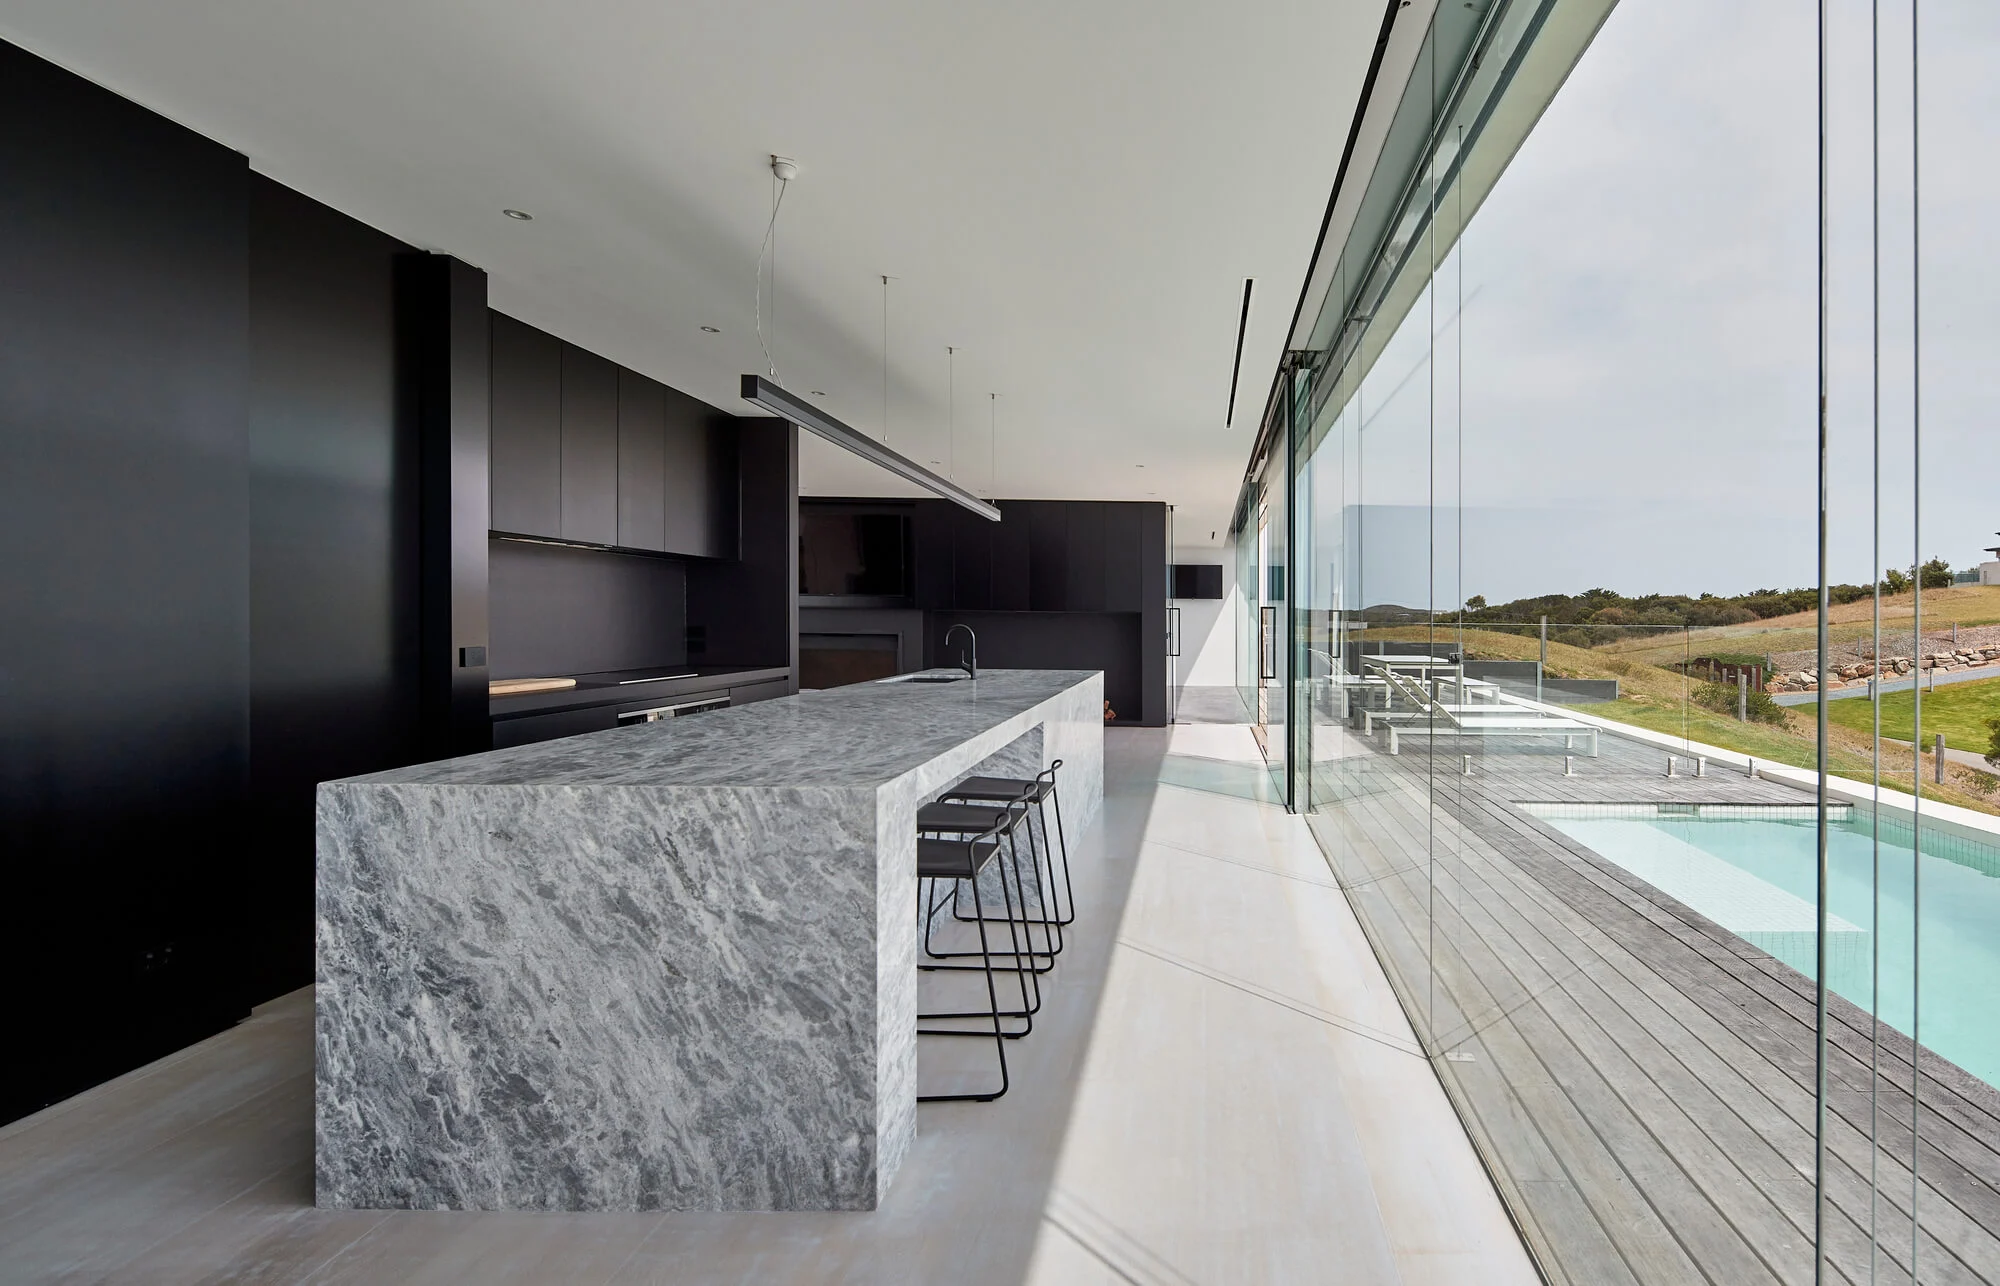 A kitchen with a marble counter top next to a swimming pool
